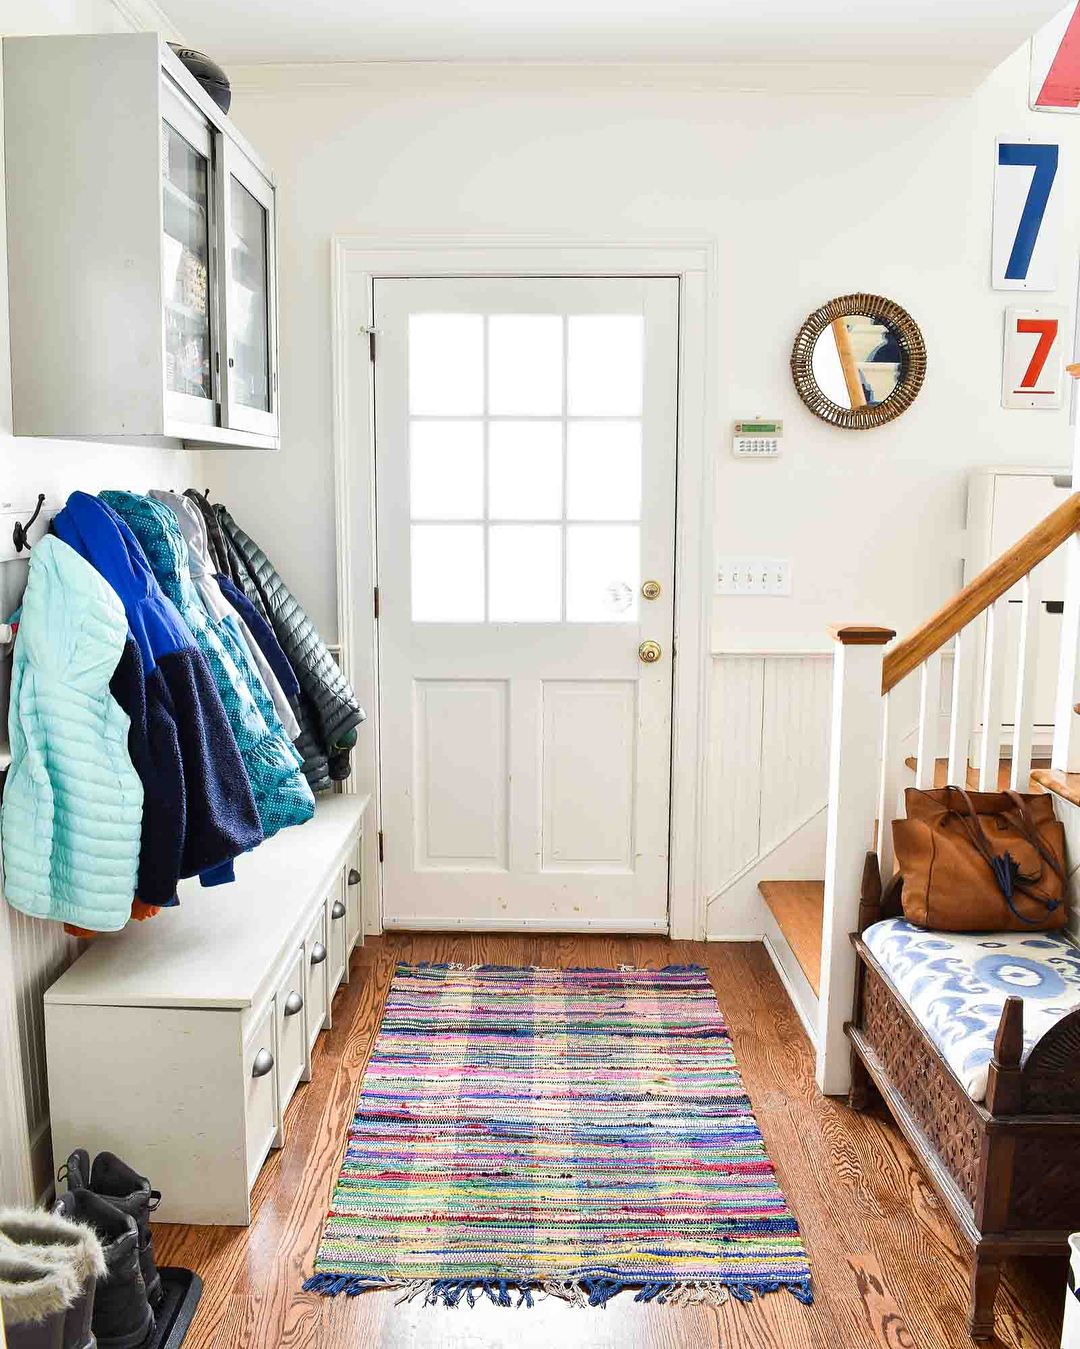 https://www.extraspace.com/blog/wp-content/uploads/2018/10/create-in-entryway-mudroom-ideas.jpg